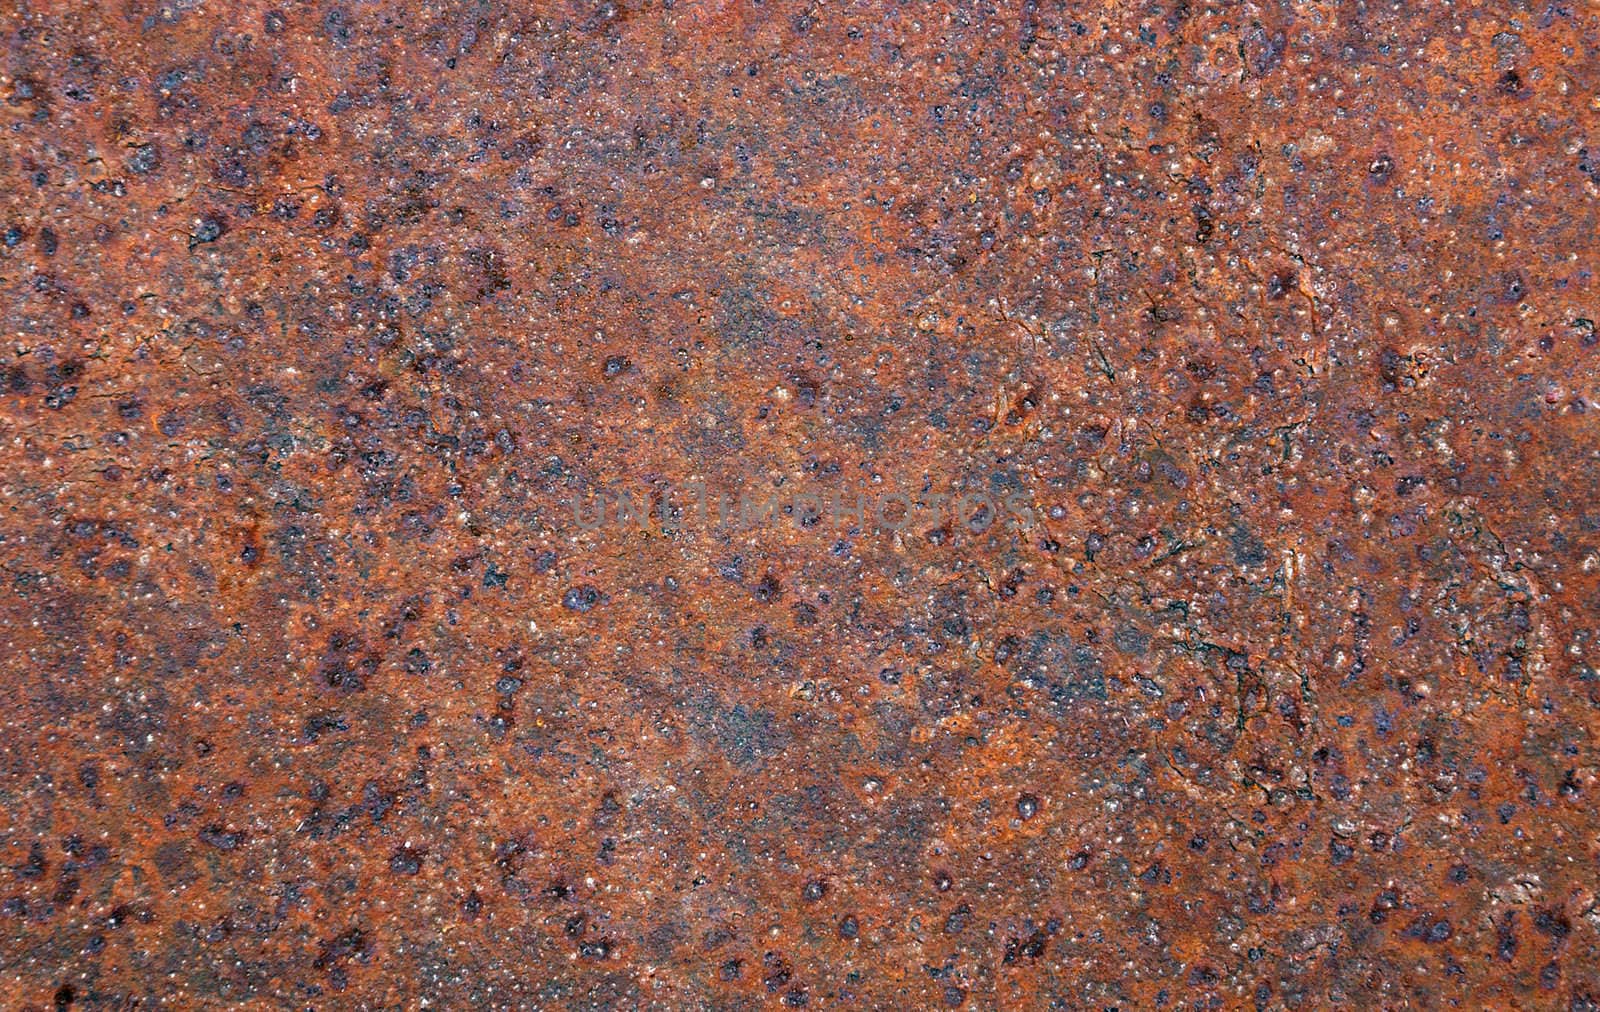 patterned colored oxidation products on the surface of metal